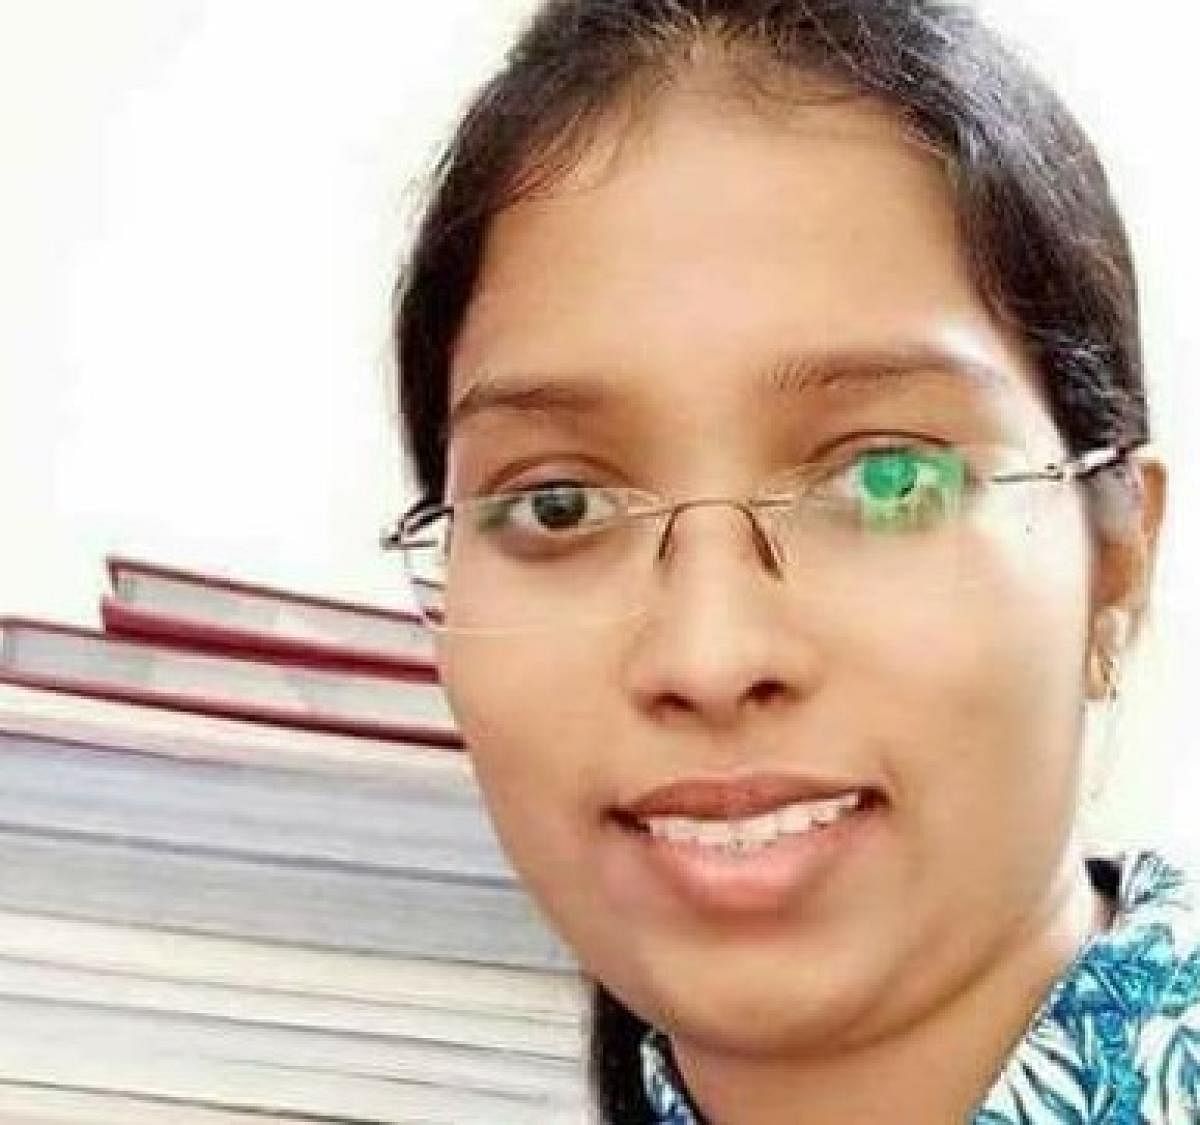 Asna, the girl from Kannur who was injured in a violent incident as a kid